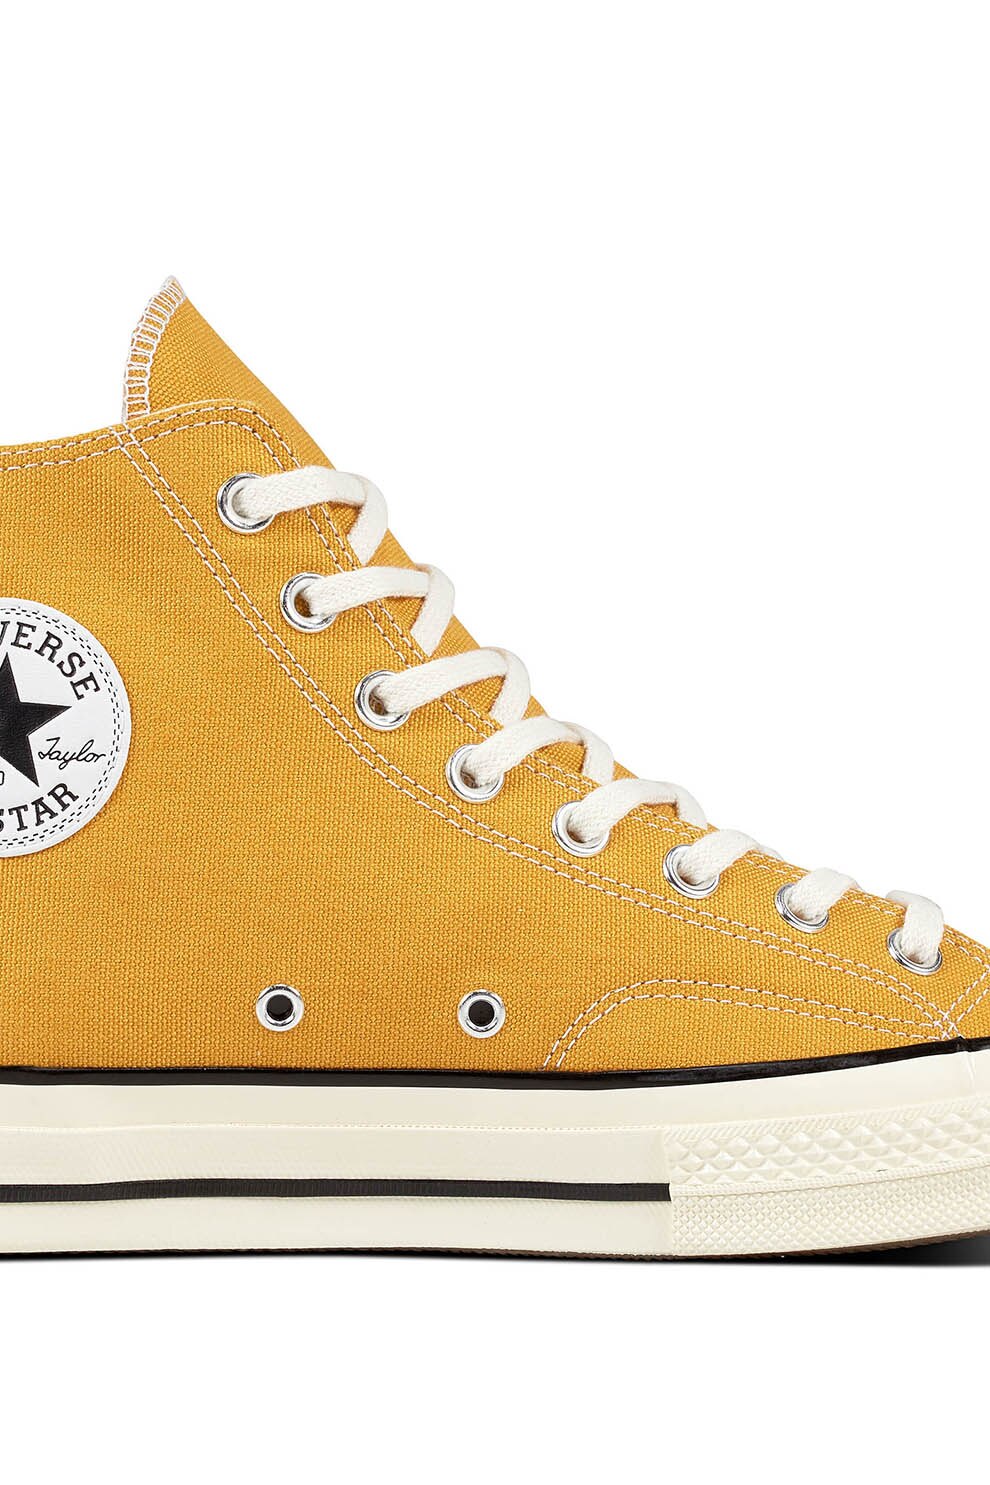 Skillful sin Existence Converse, Tenisi unisex inalti Chuck 70, Galben sofran, 4 - eMAG.ro